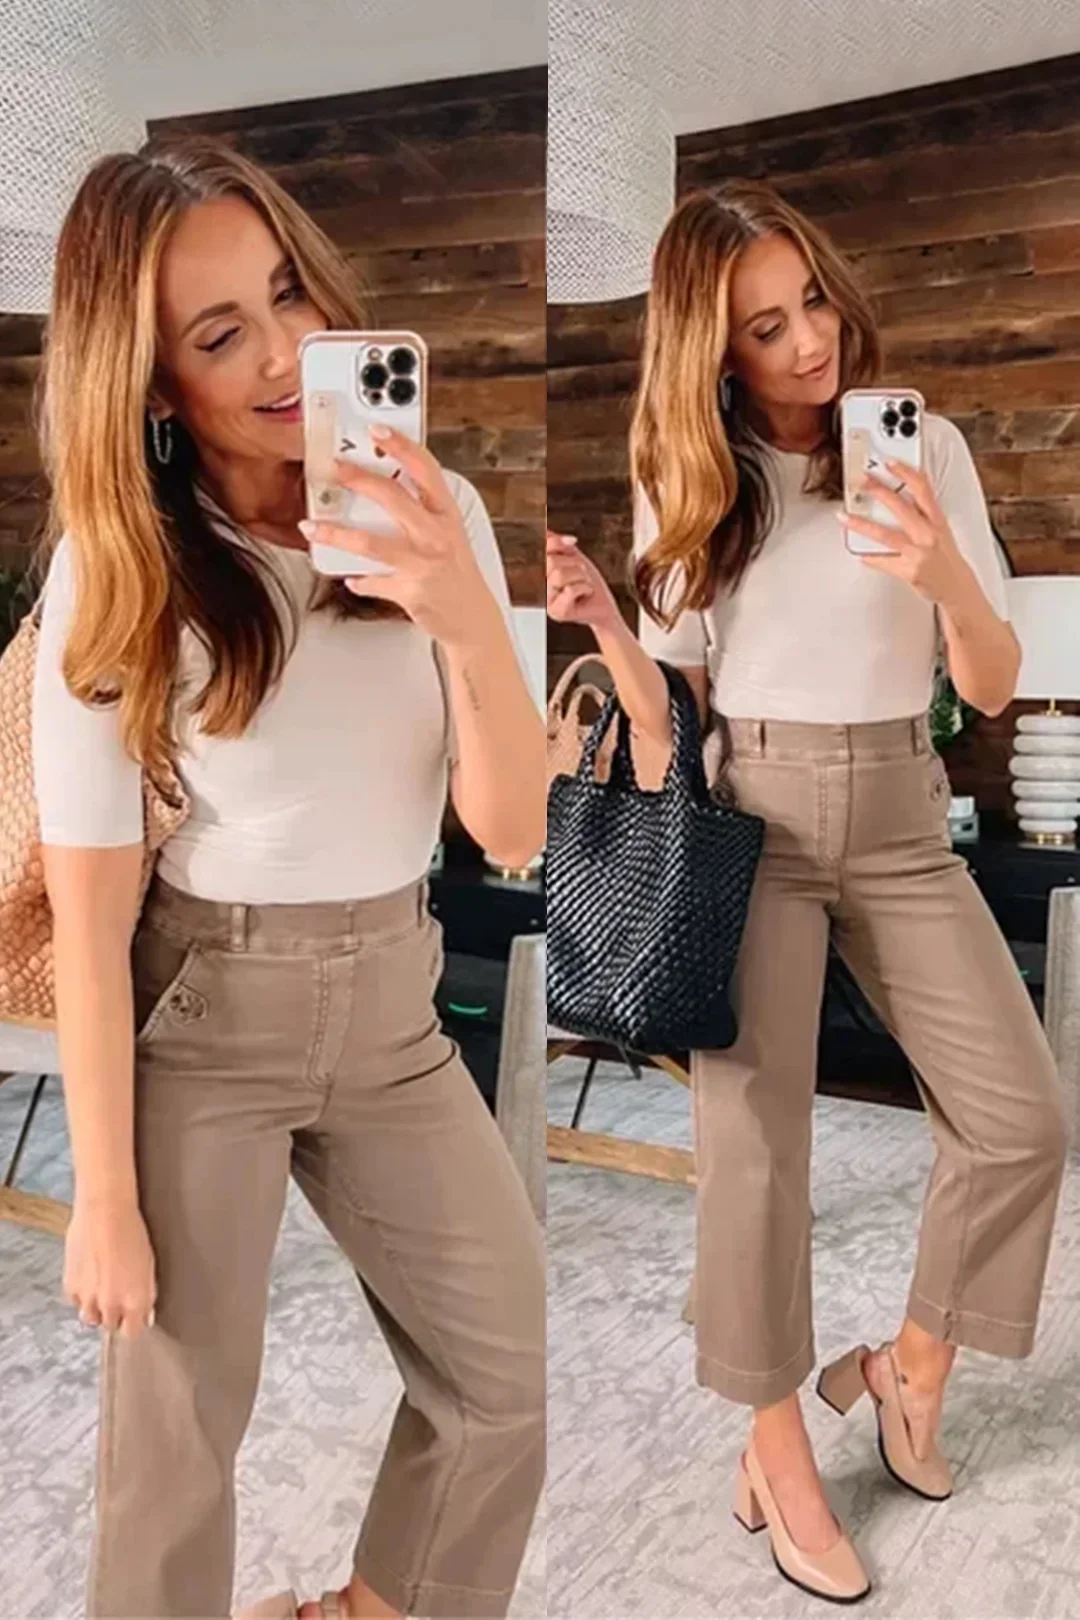 Stretch Twill Cropped Wide Leg Pant (Buy 2 Free Shipping)